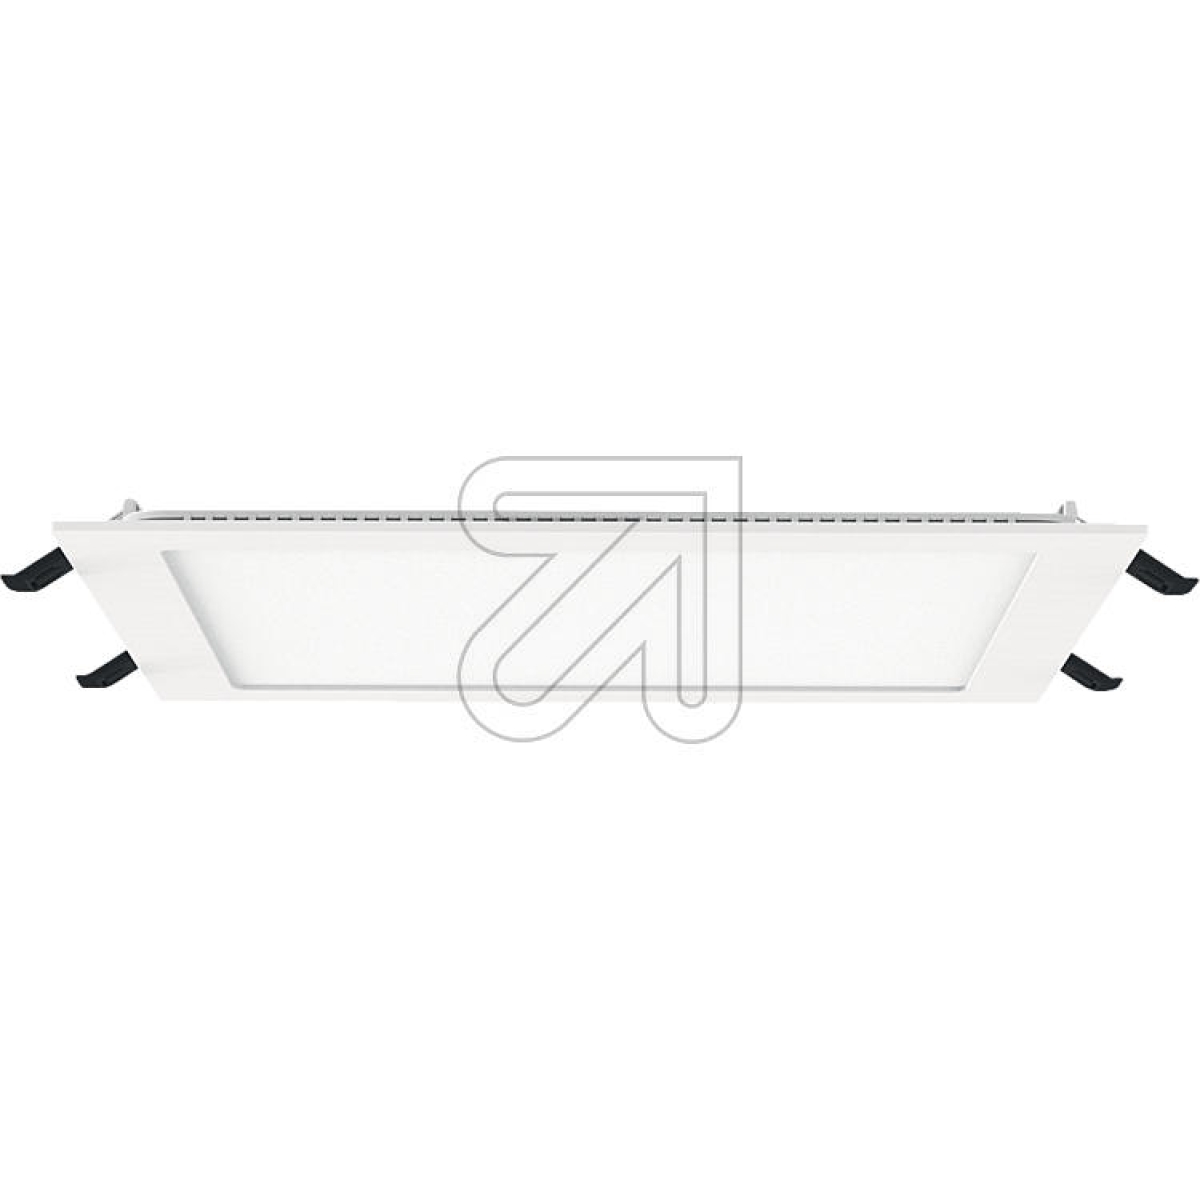 EVNLED built-in panel, CCT-DALI, 25W, white, square 230V, beam angle 115°, dimmable, LDQ300125Article-No: 651830